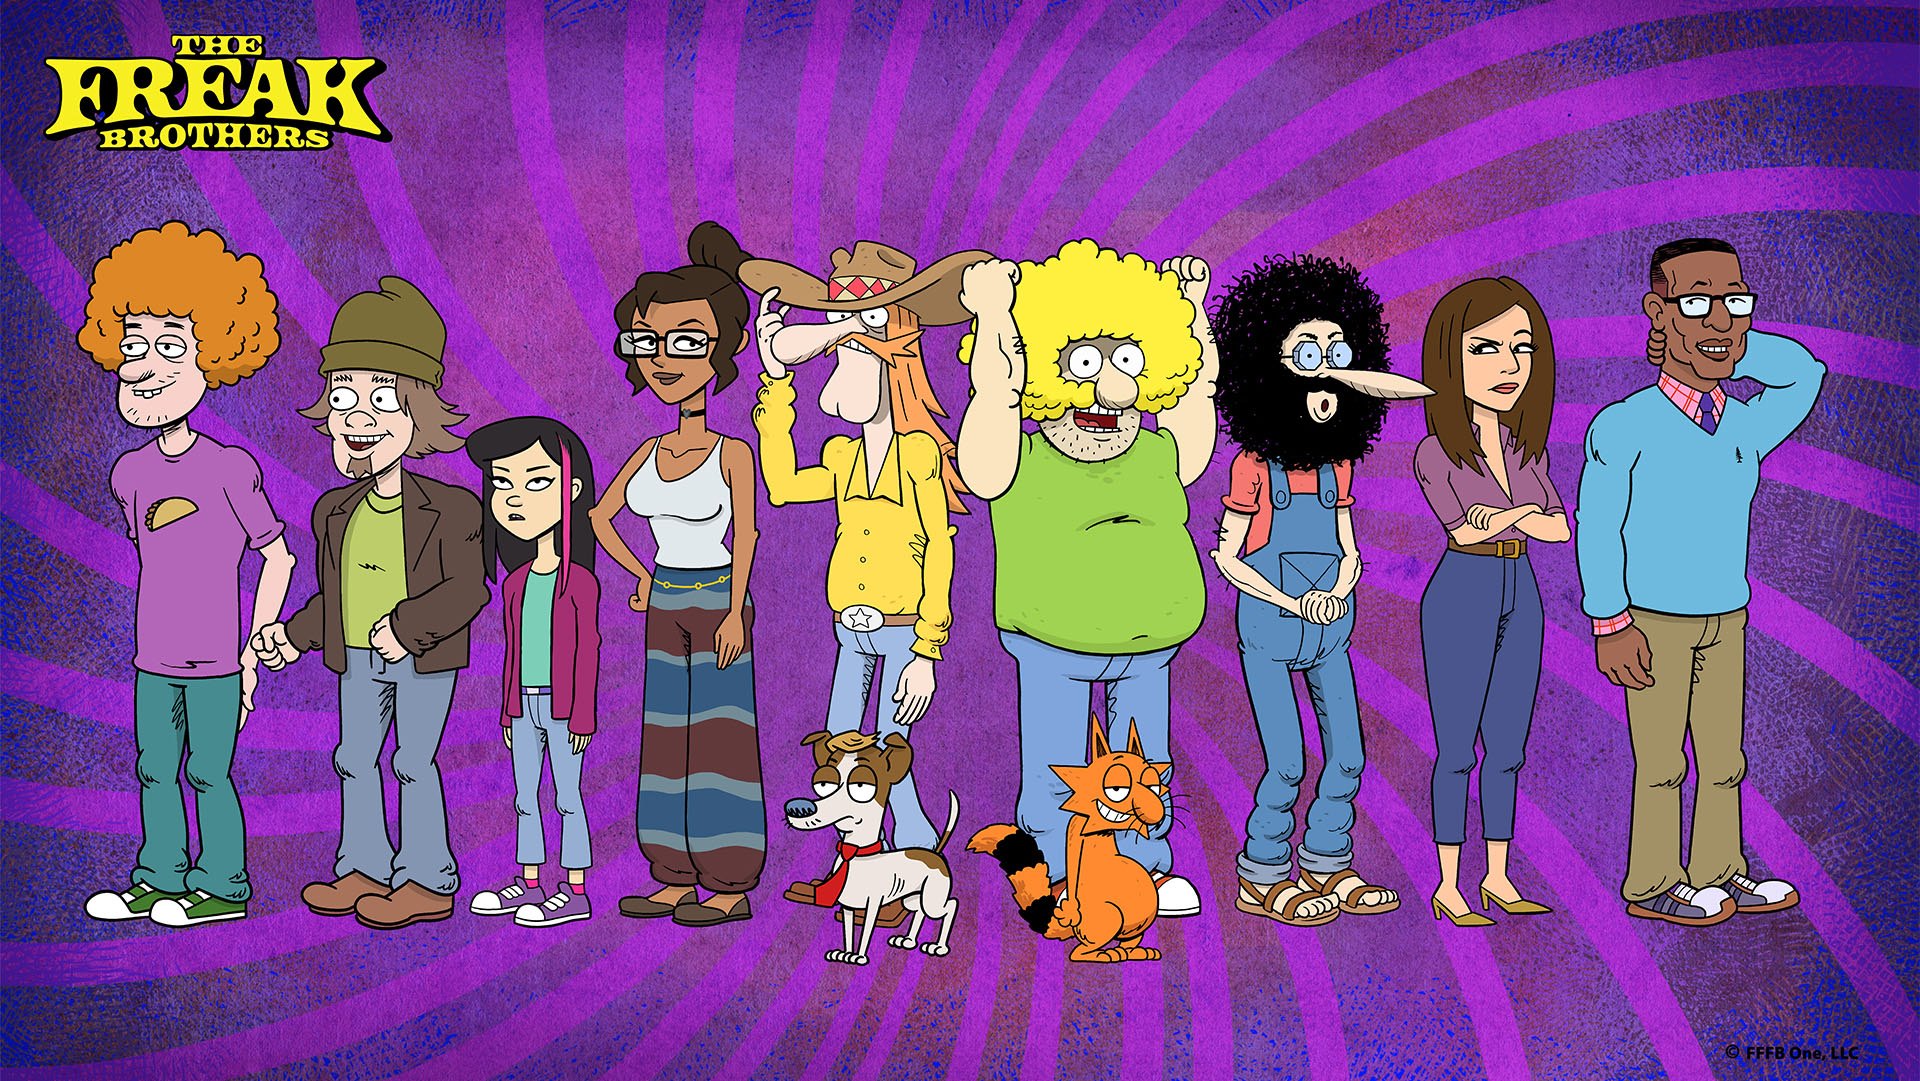 Tubi’s ‘The Freak Brothers’ is Most Watched on the Free Streaming Service